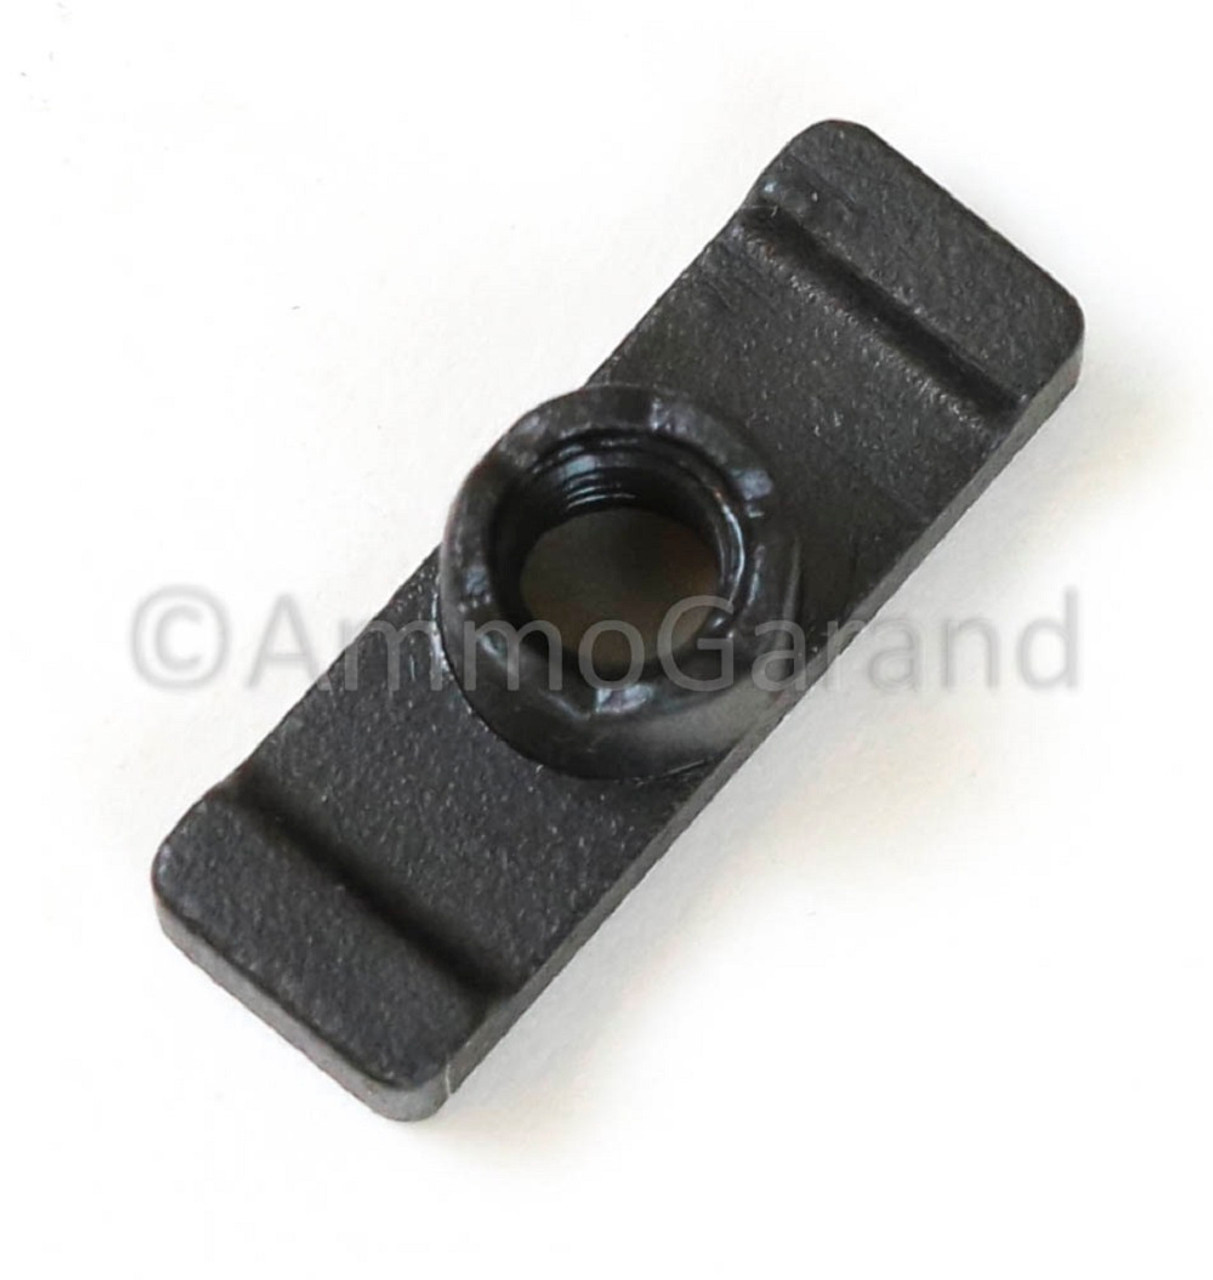 M1 Garand Rear Sight Type III Lock Bar Squared End - NEW - Replacement